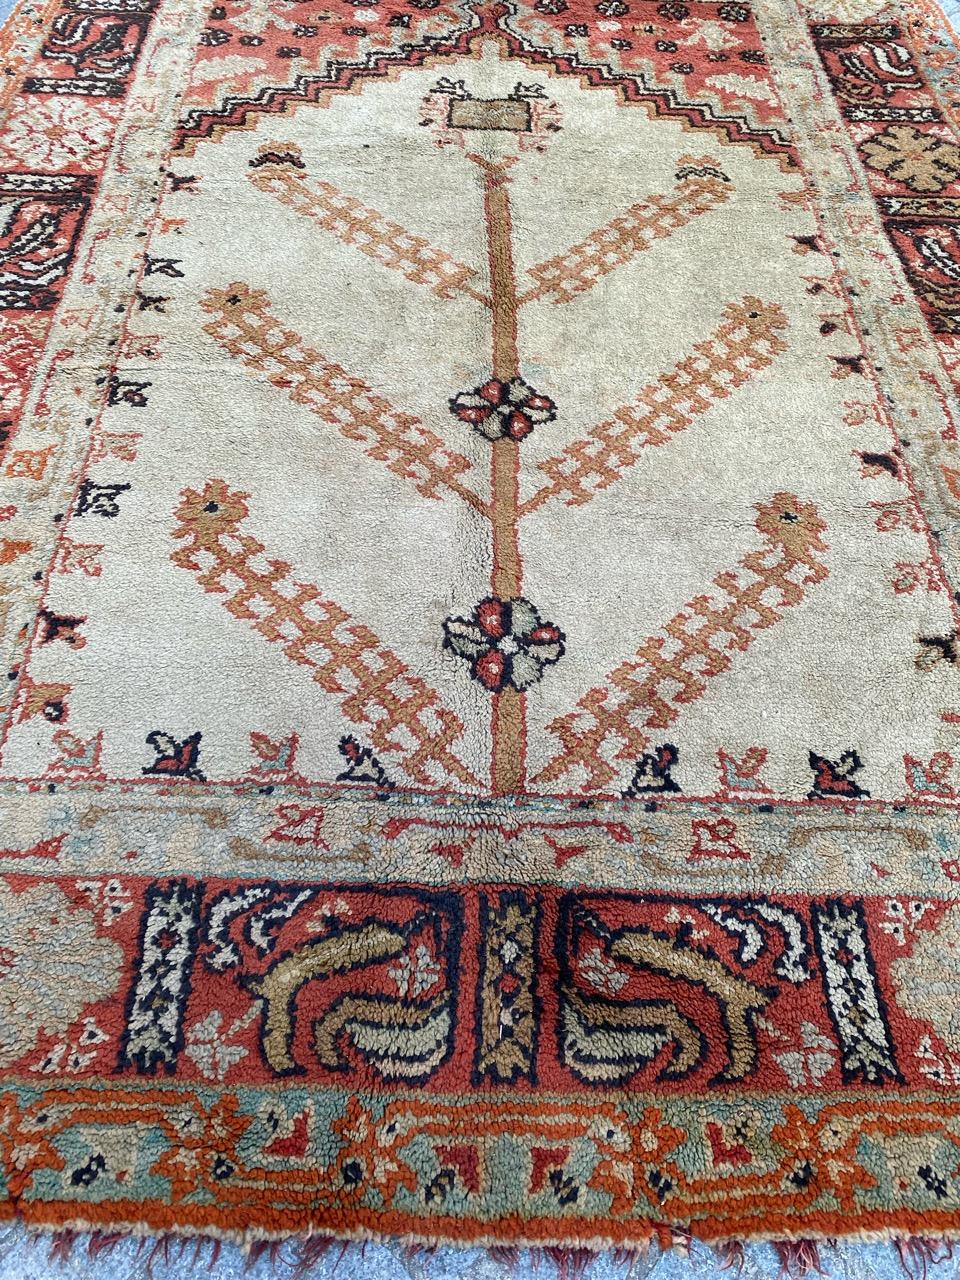 Pretty late 19th century Turkish Anatolian Smyrne rug with beautiful geometrical design with mihrab design and nice natural colors, entirely hand knotted with wool velvet on wool foundation.

✨✨✨
